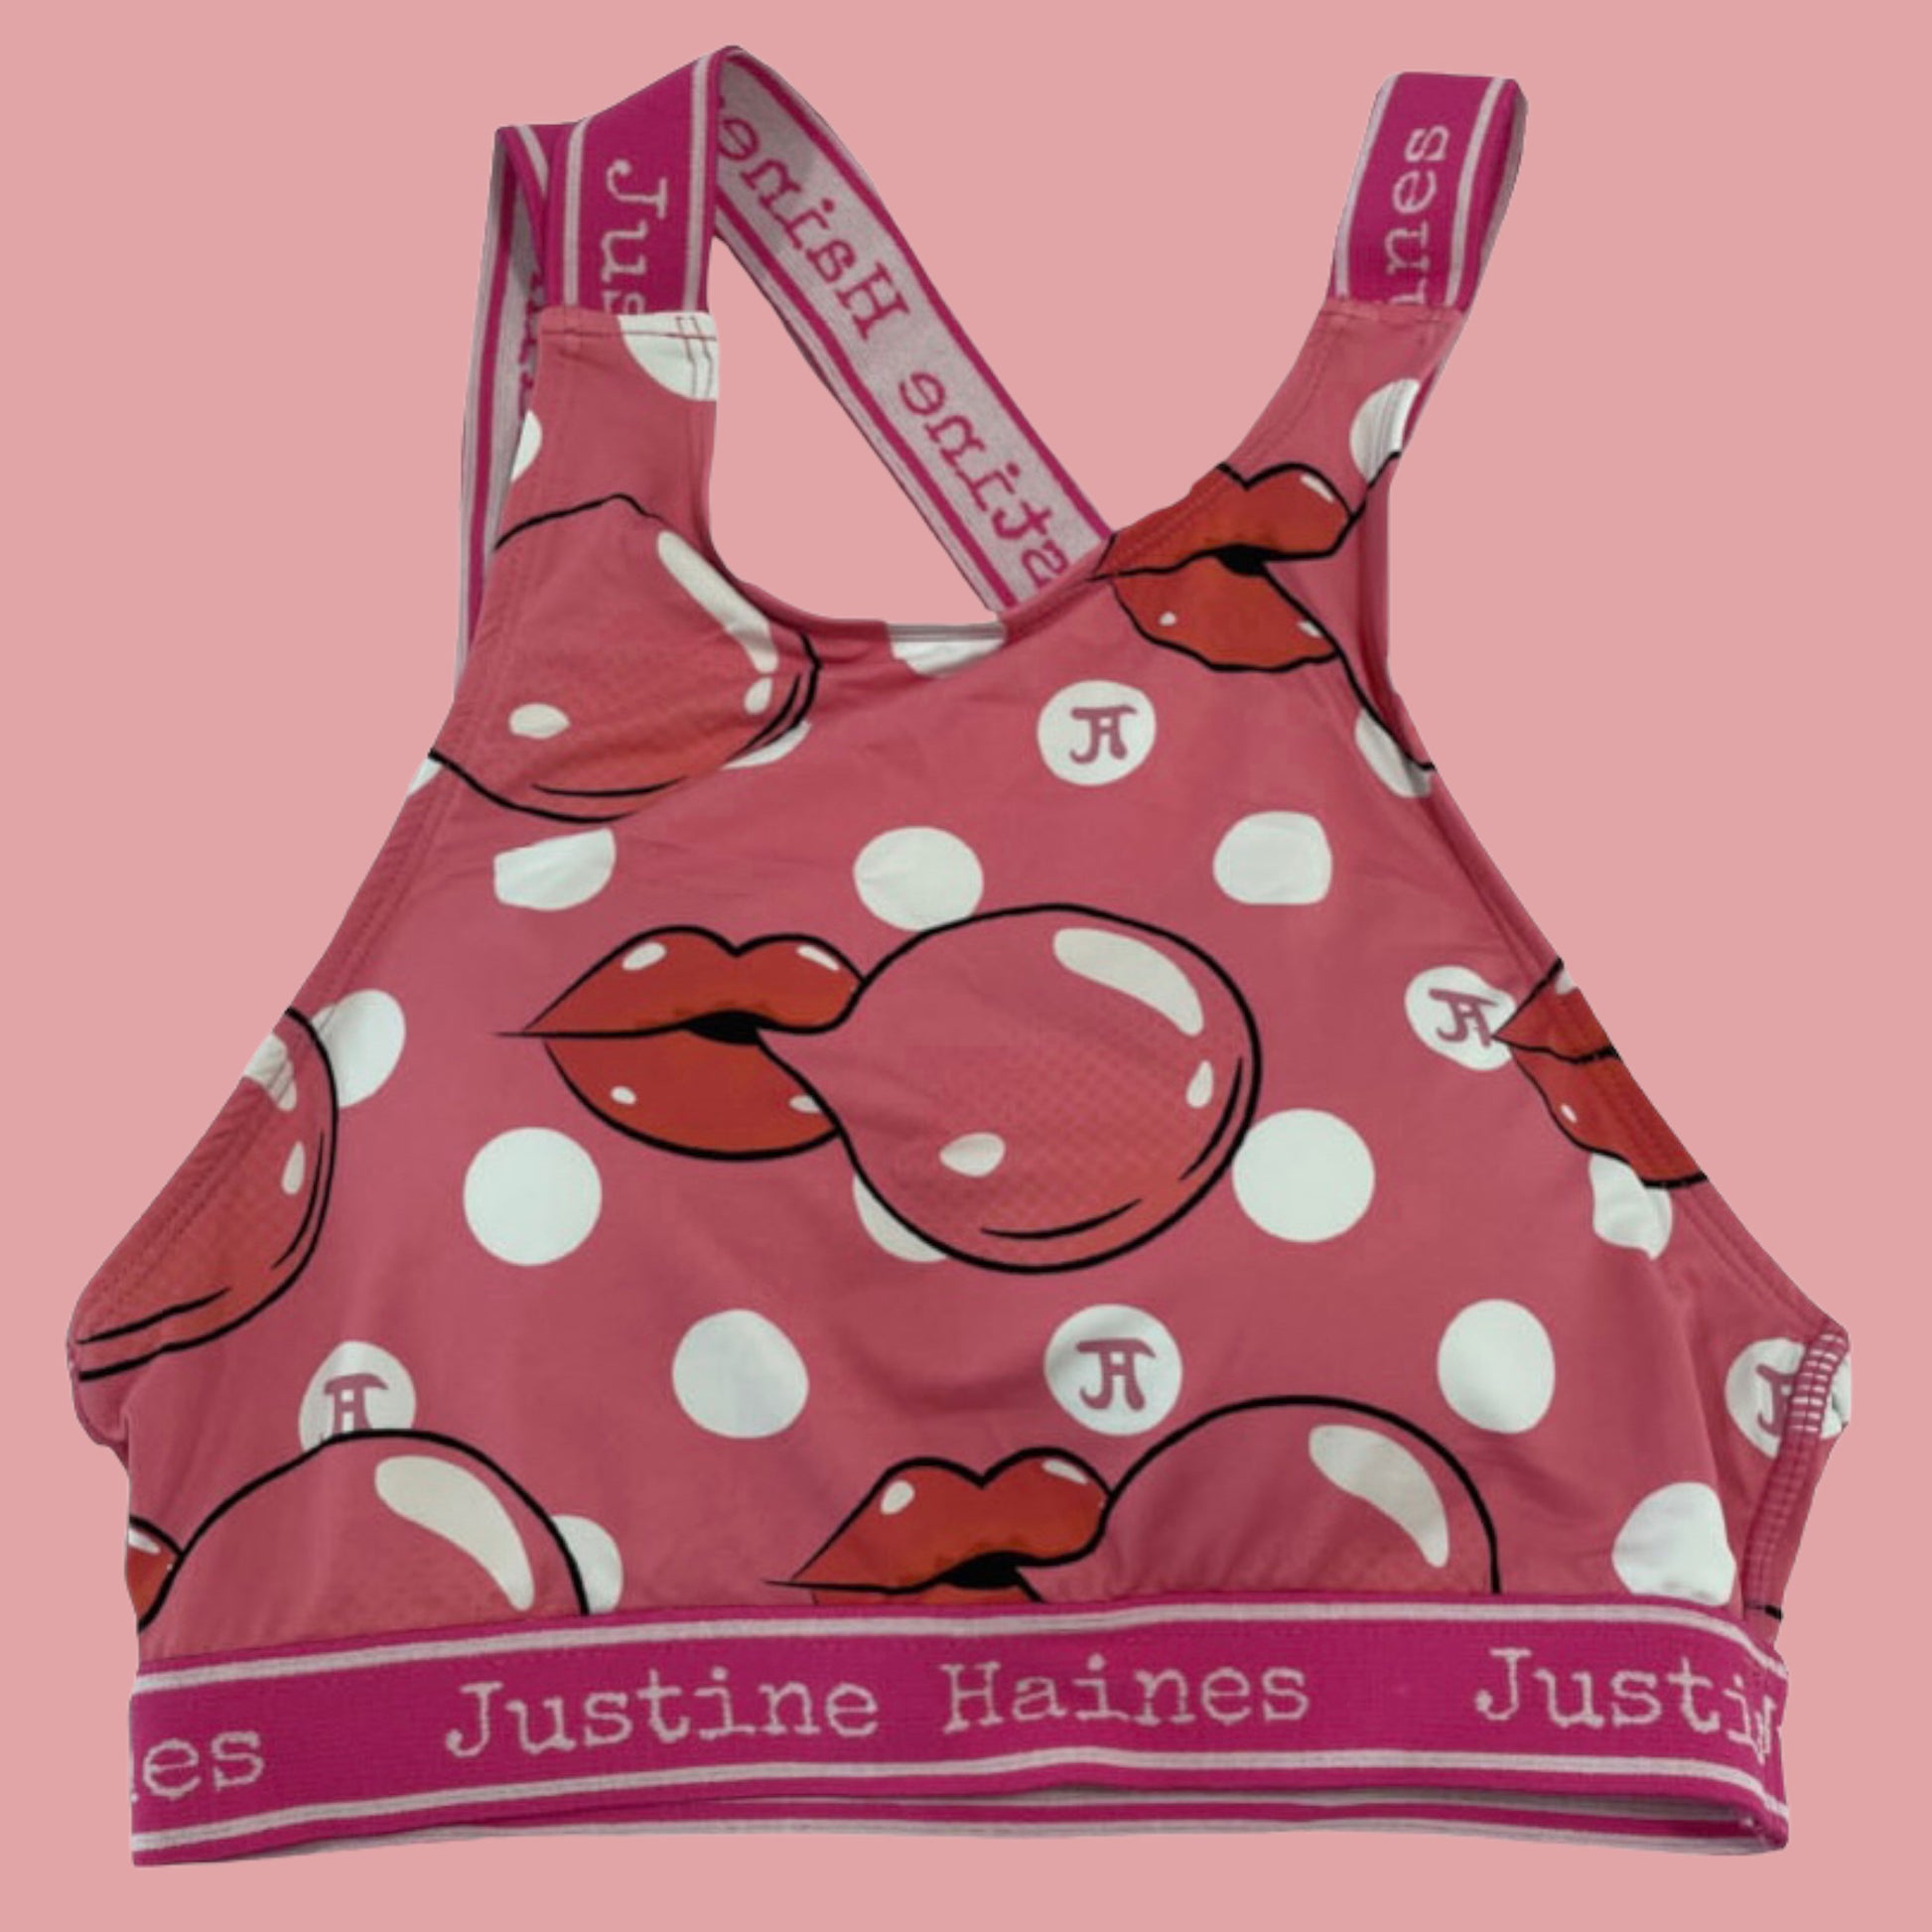 Asymmetrical Strappy Bra Top in Pink Bubble Gum – Justine Haines